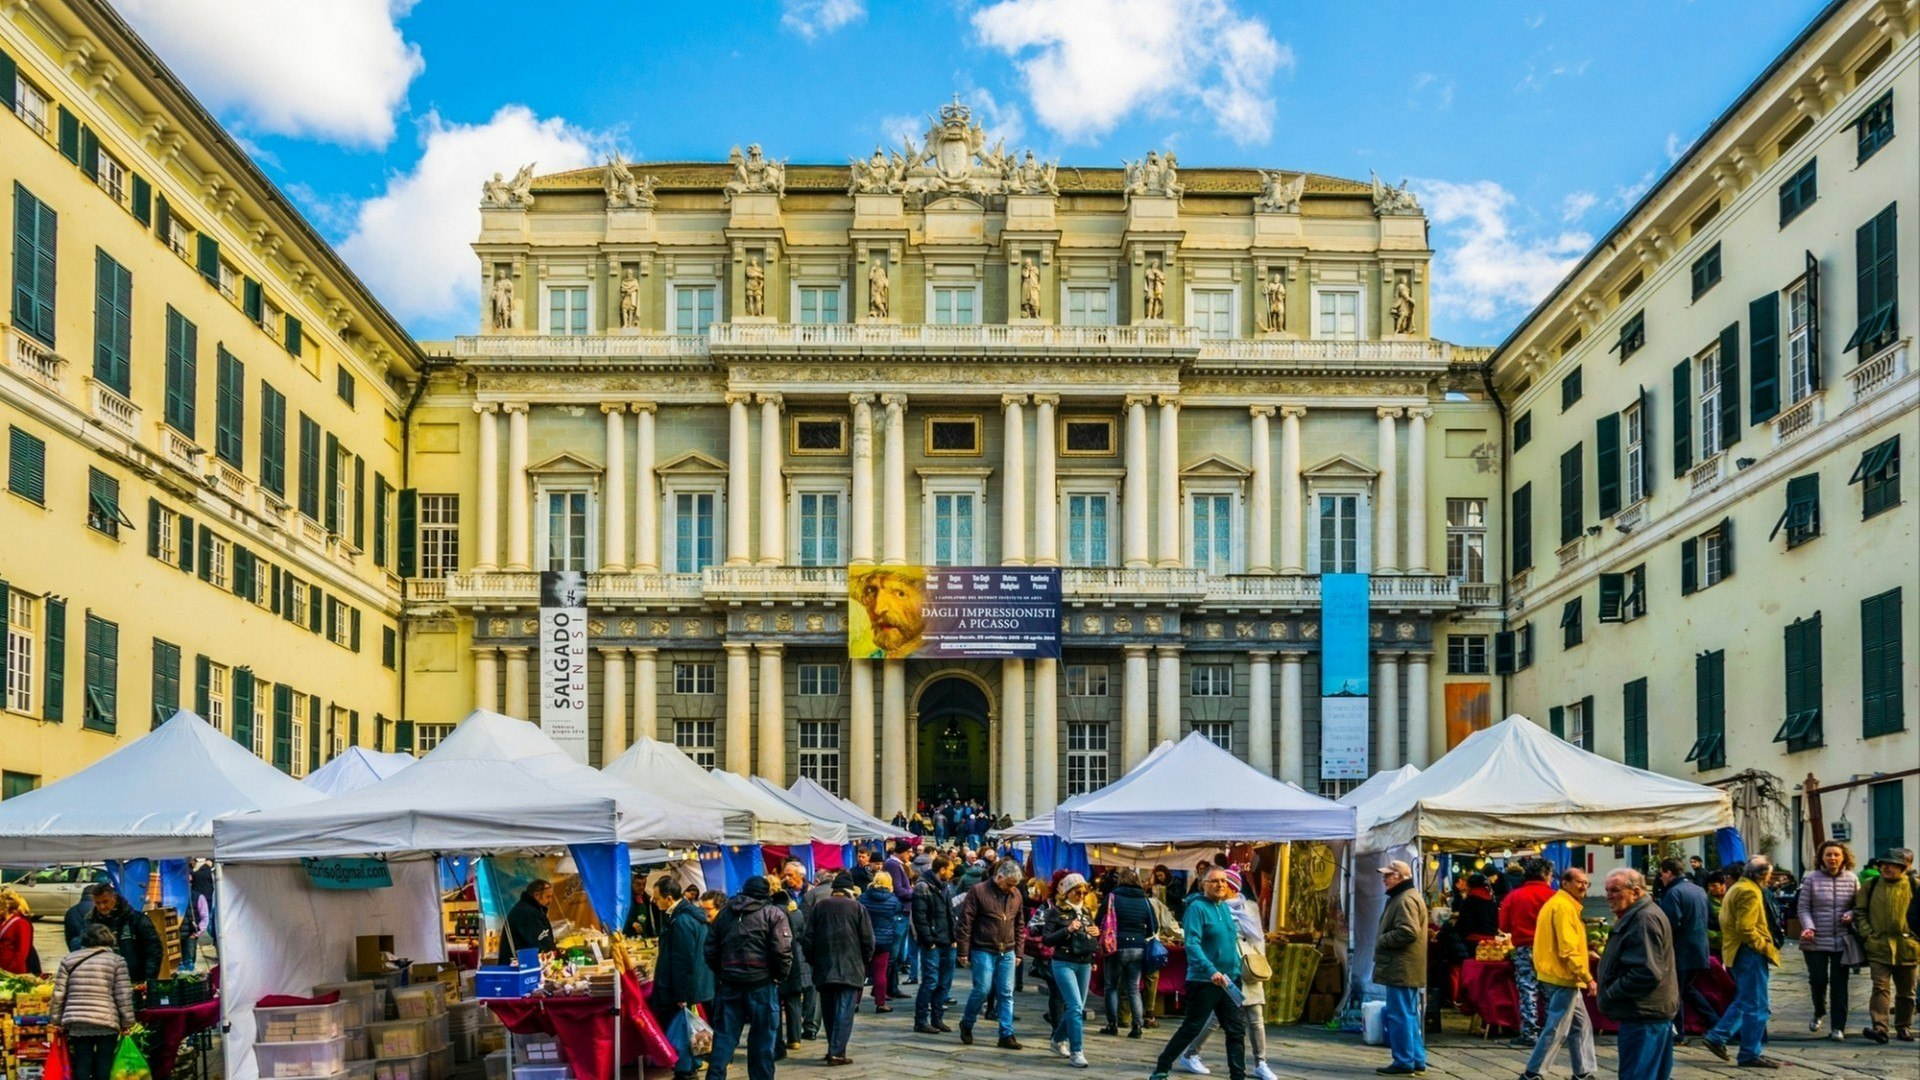 People are enjoying sunny day on the square raffaele de ferrari in front of the palazzo ducale Genoa, Italy